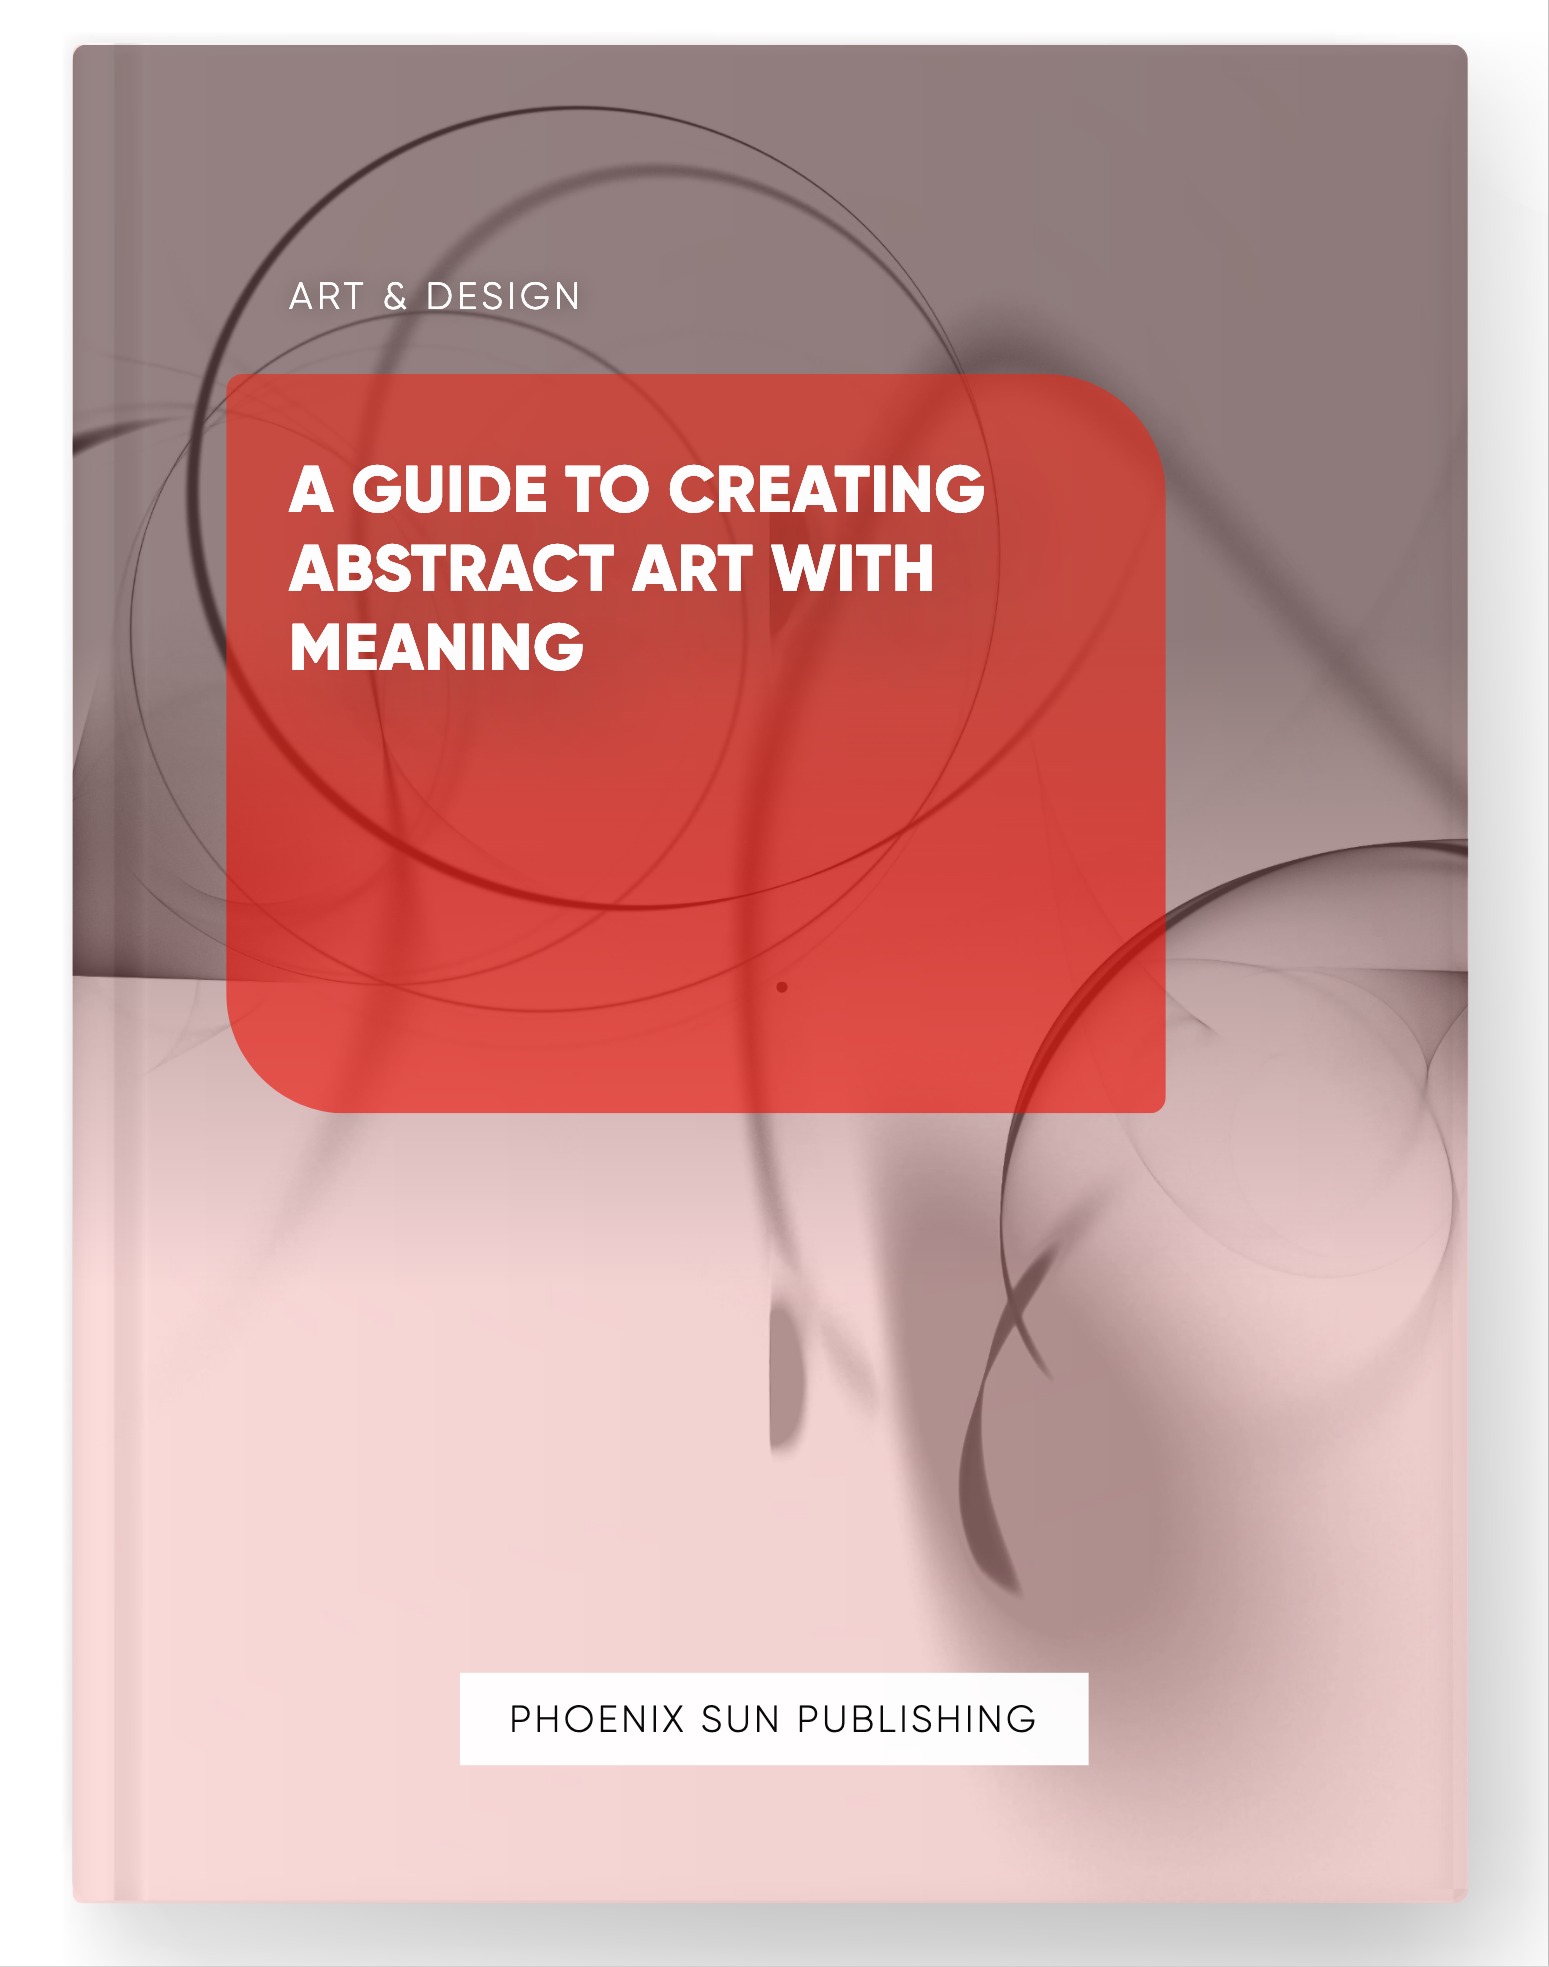 A Guide to Creating Abstract Art with Meaning